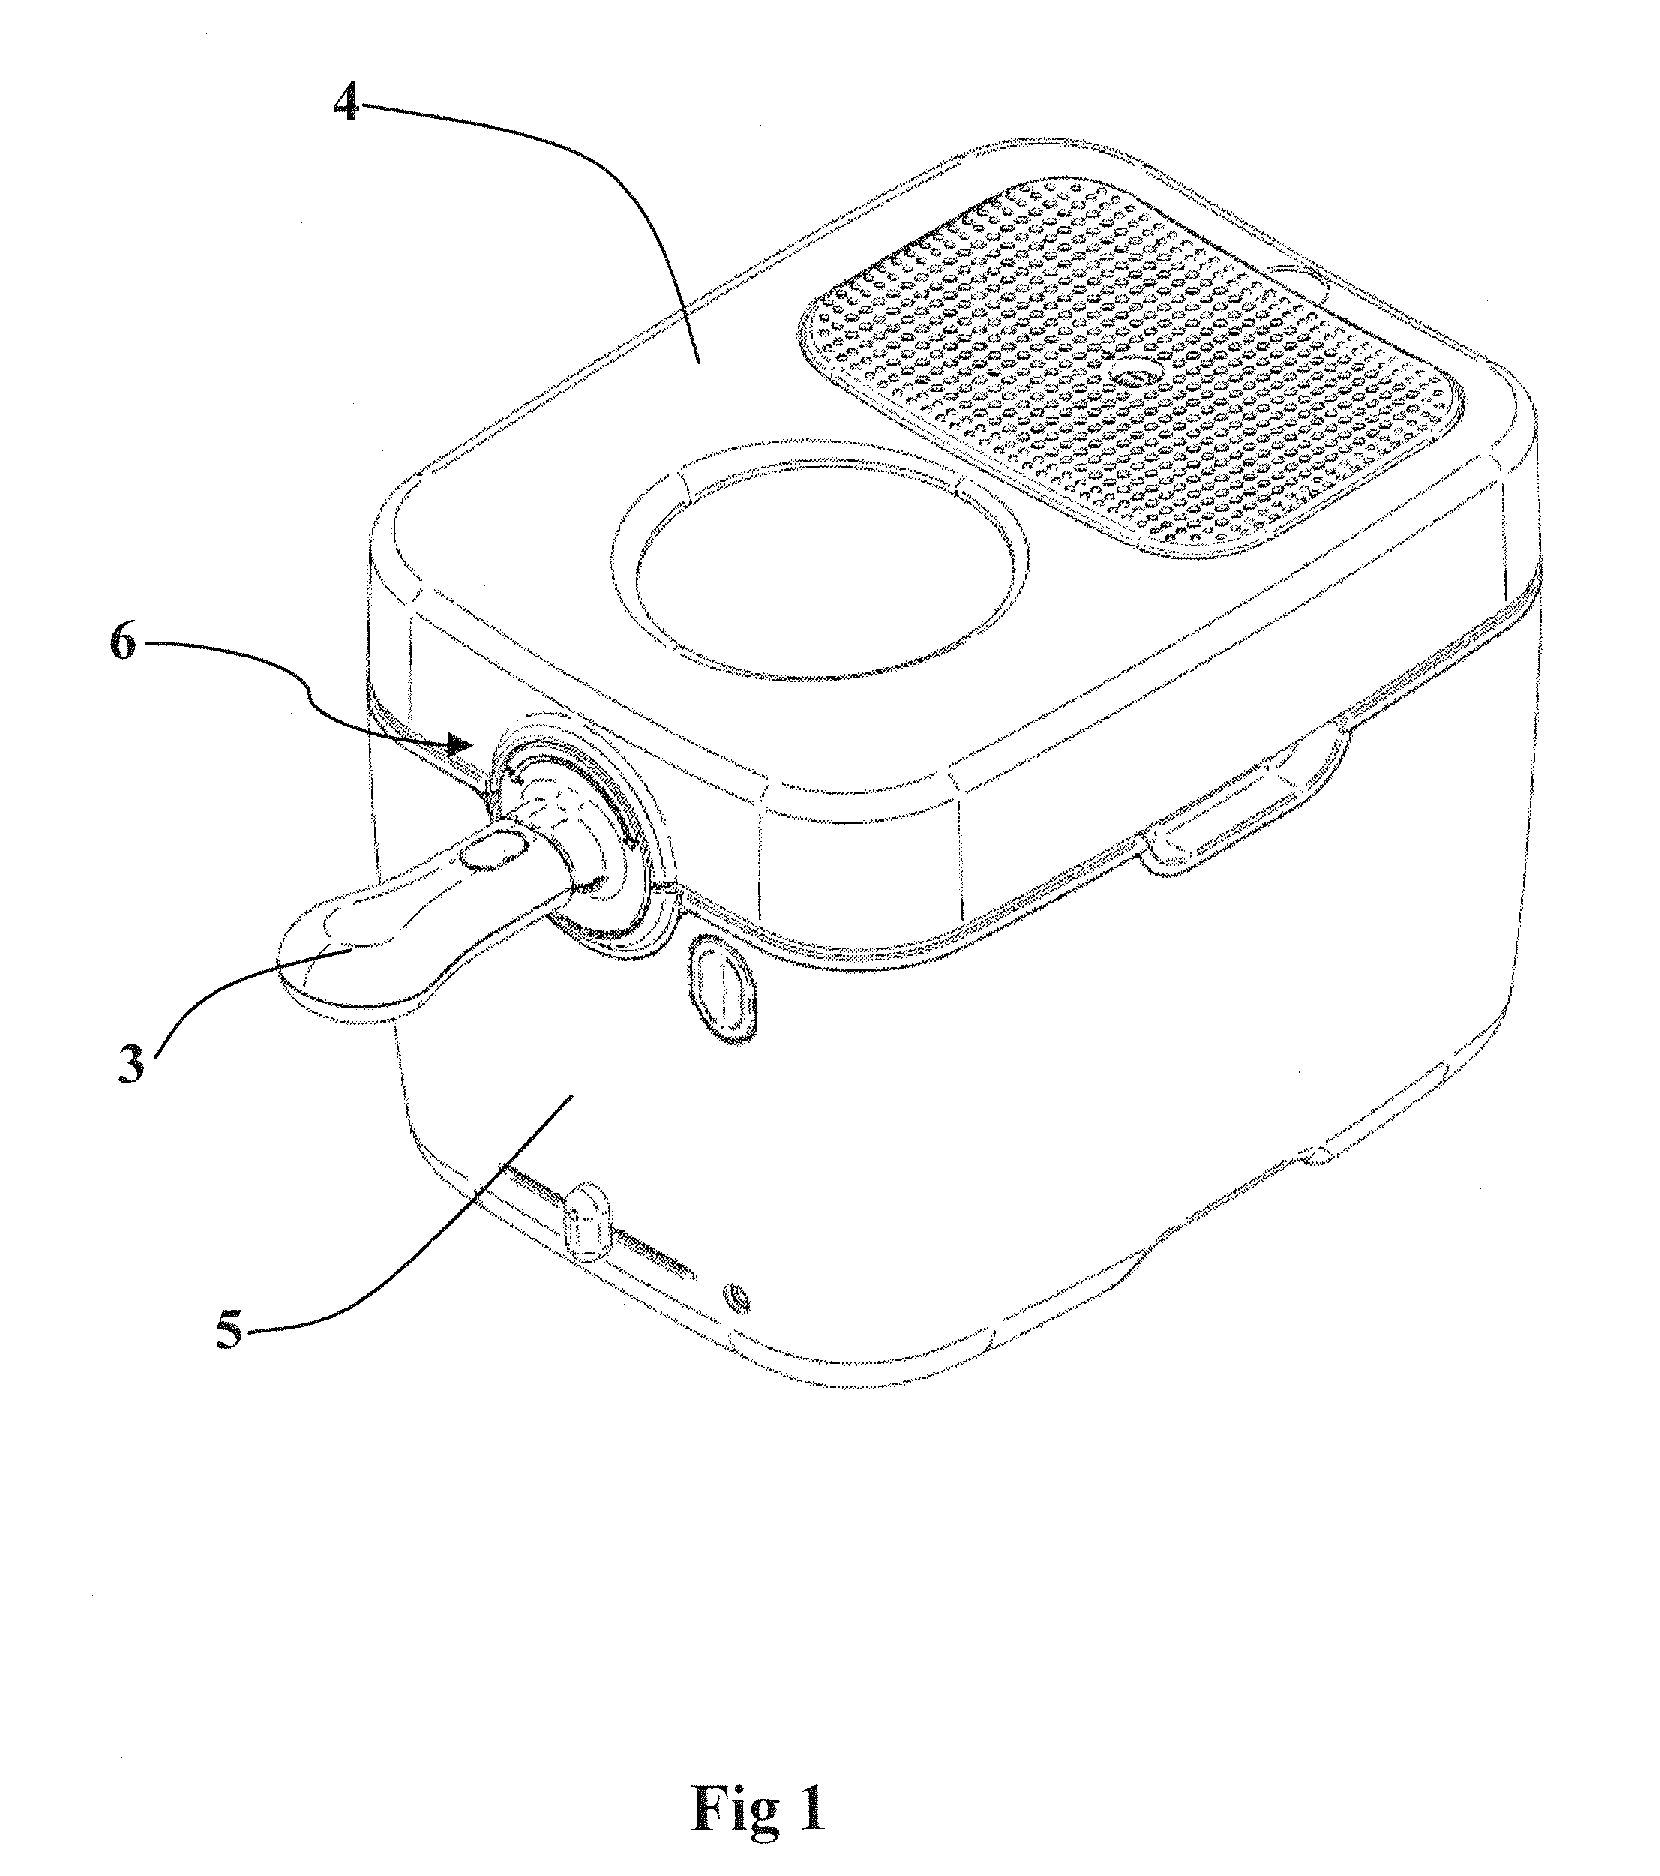 Cooking appliance and pivotal device for raising and lowering a basket for draining cooked food